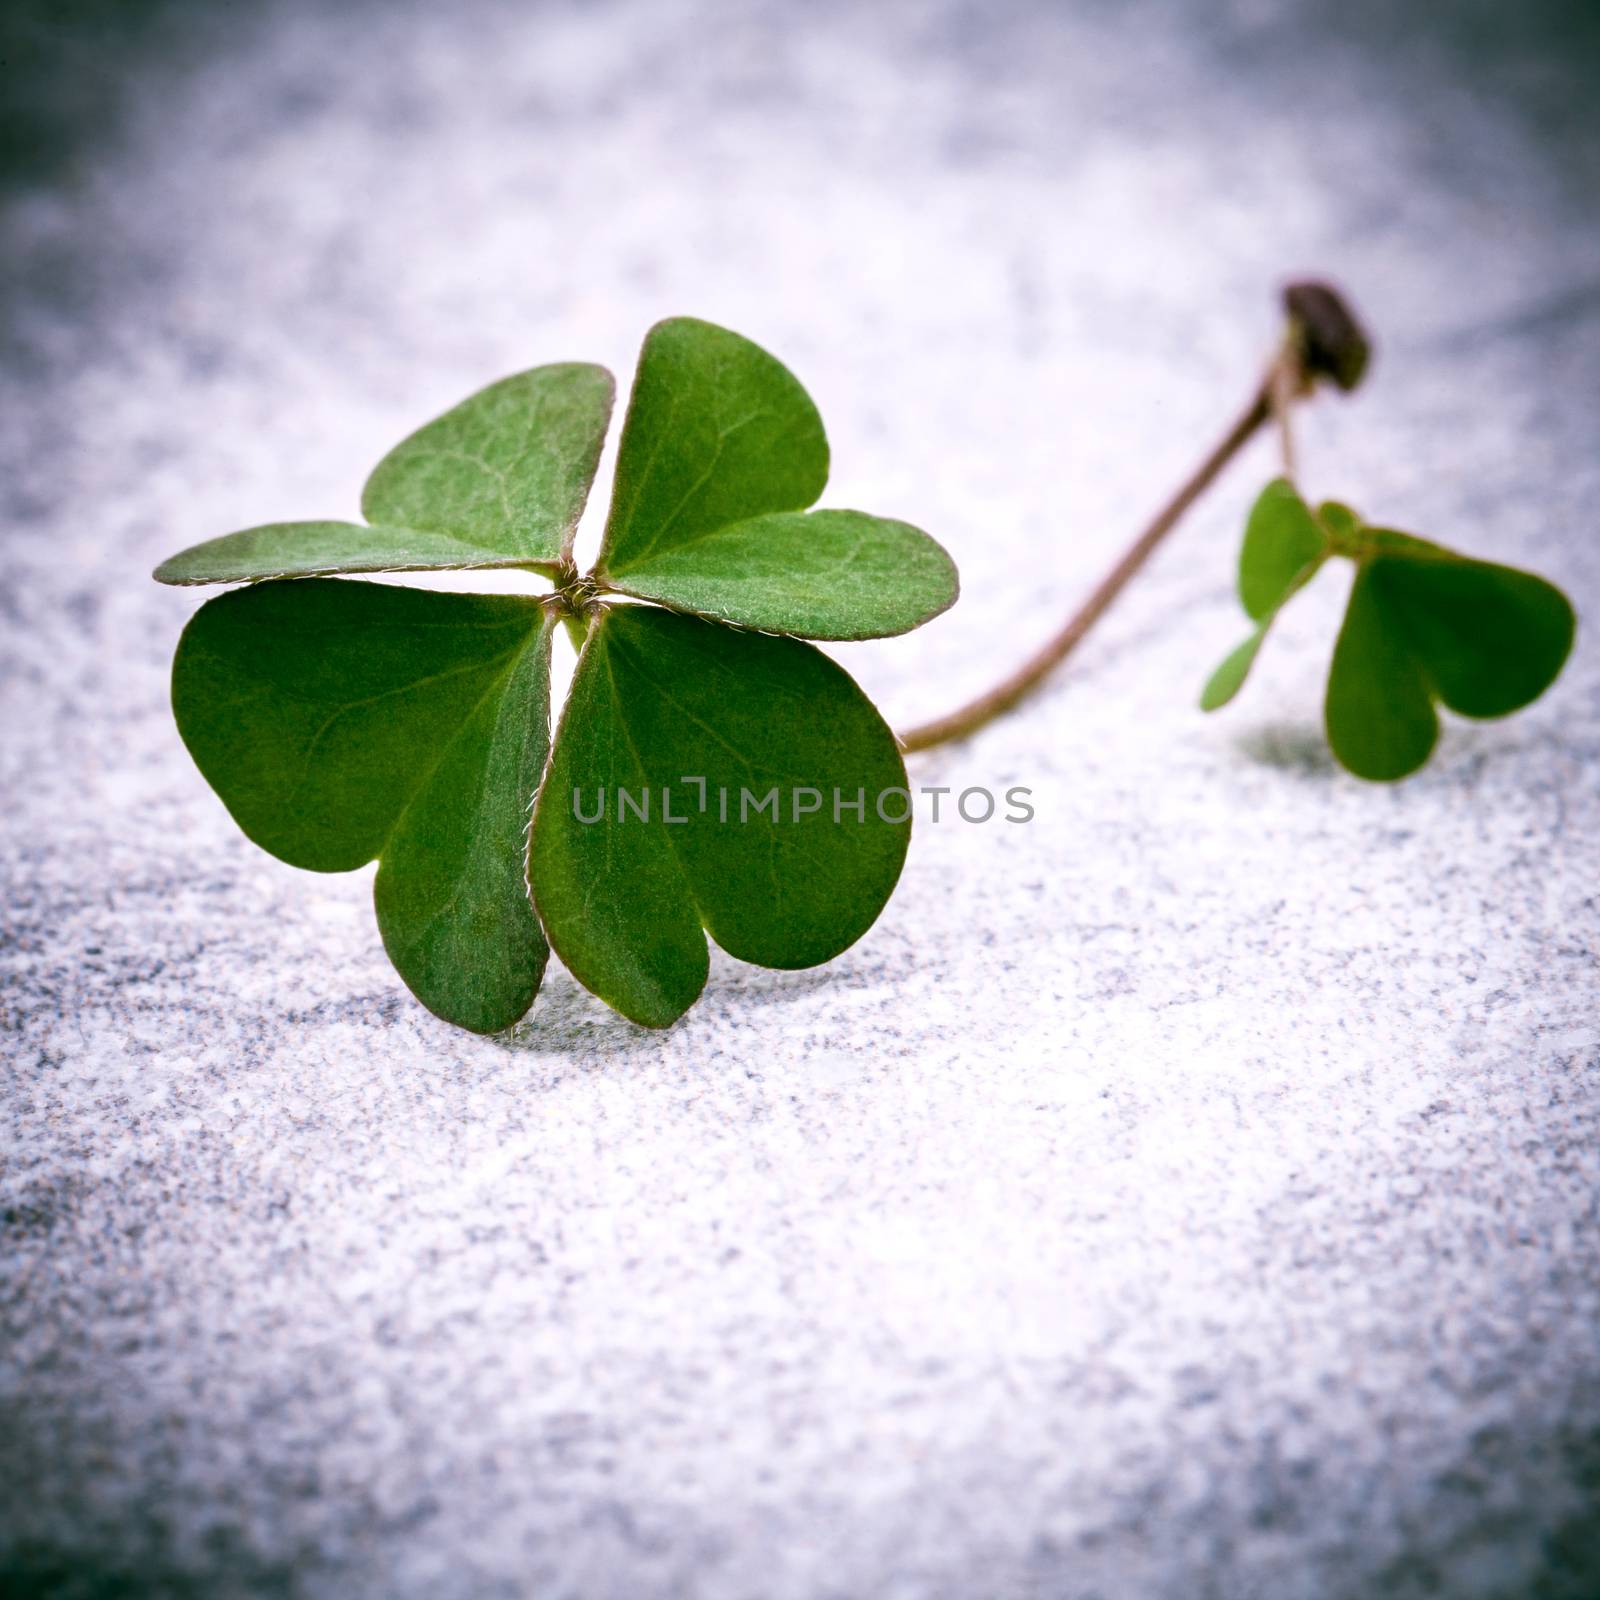 Clovers leaves on Stone .The symbolic of Four Leaf Clover the first is for faith, the second is for hope, the third is for love, and the fourth is for lucky . Clover and shamrocks is symbolic dreams .